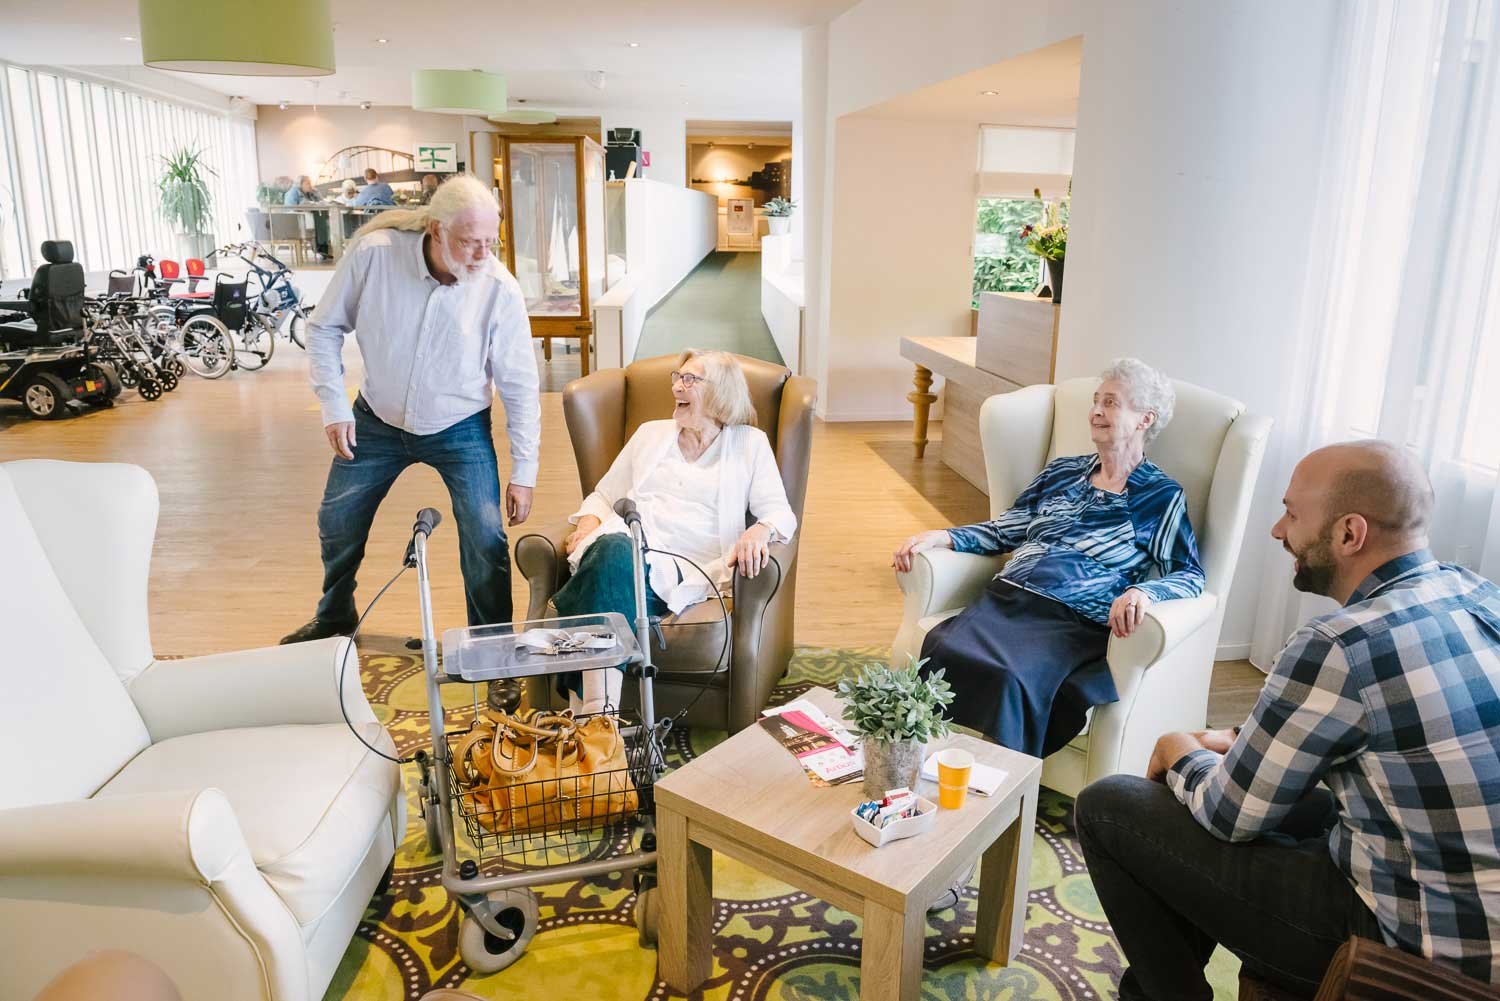 The Role Of Healthcare Services In Retirement Villages